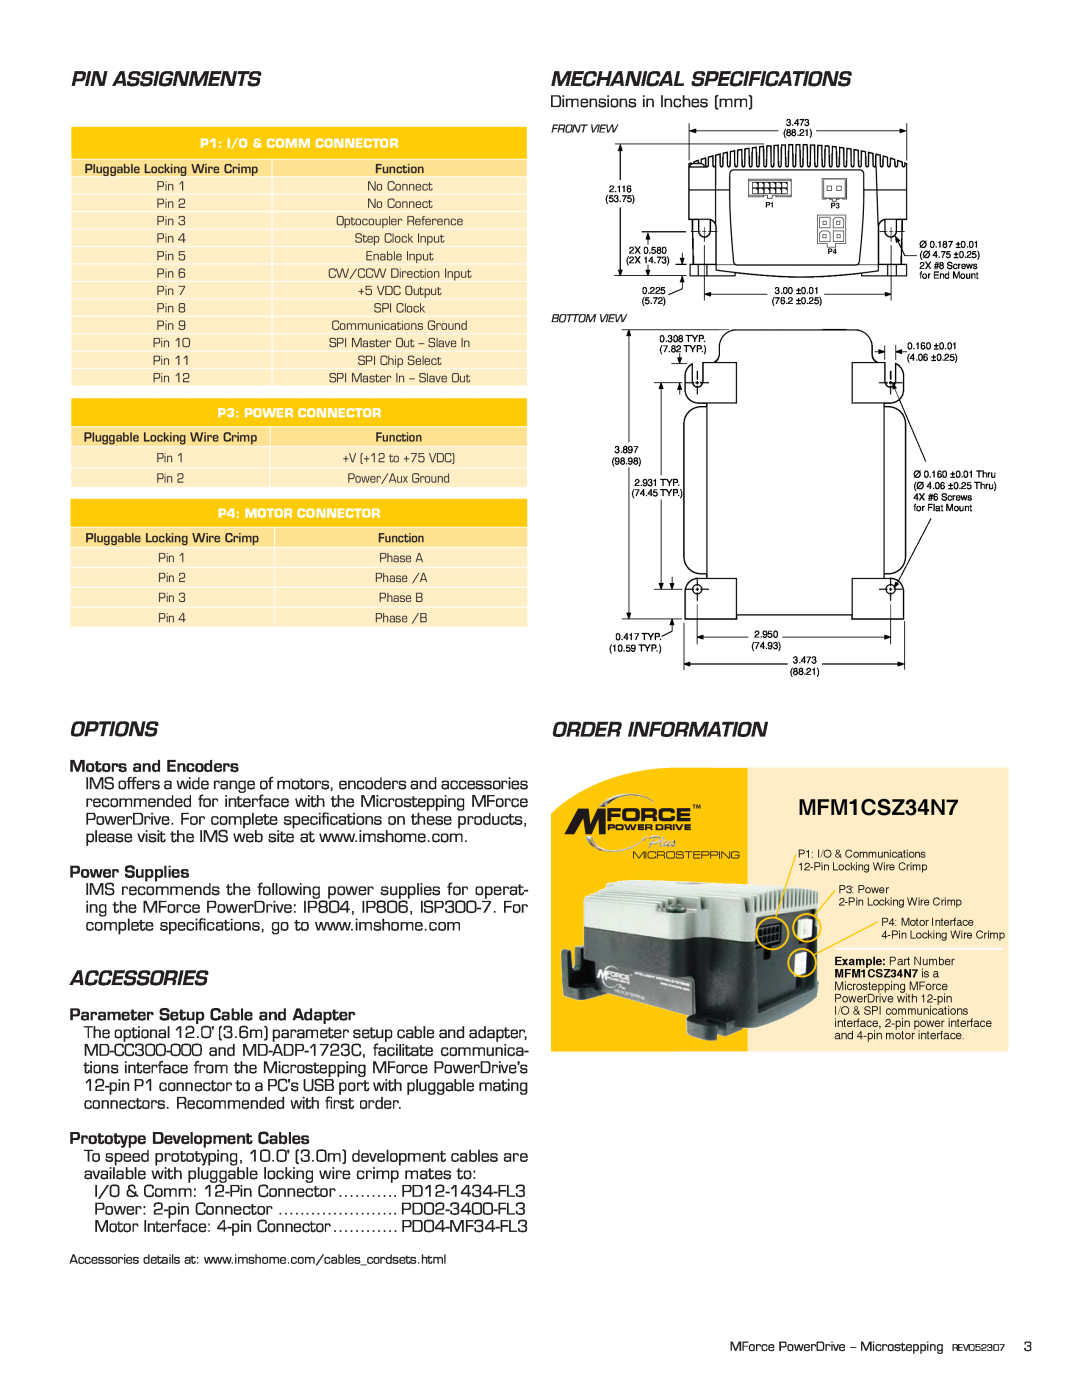 Intelligent Motion Systems Excellence in Motion Pin Assignments, Mechanical Specifications, Options, Accessories, Forcetm 